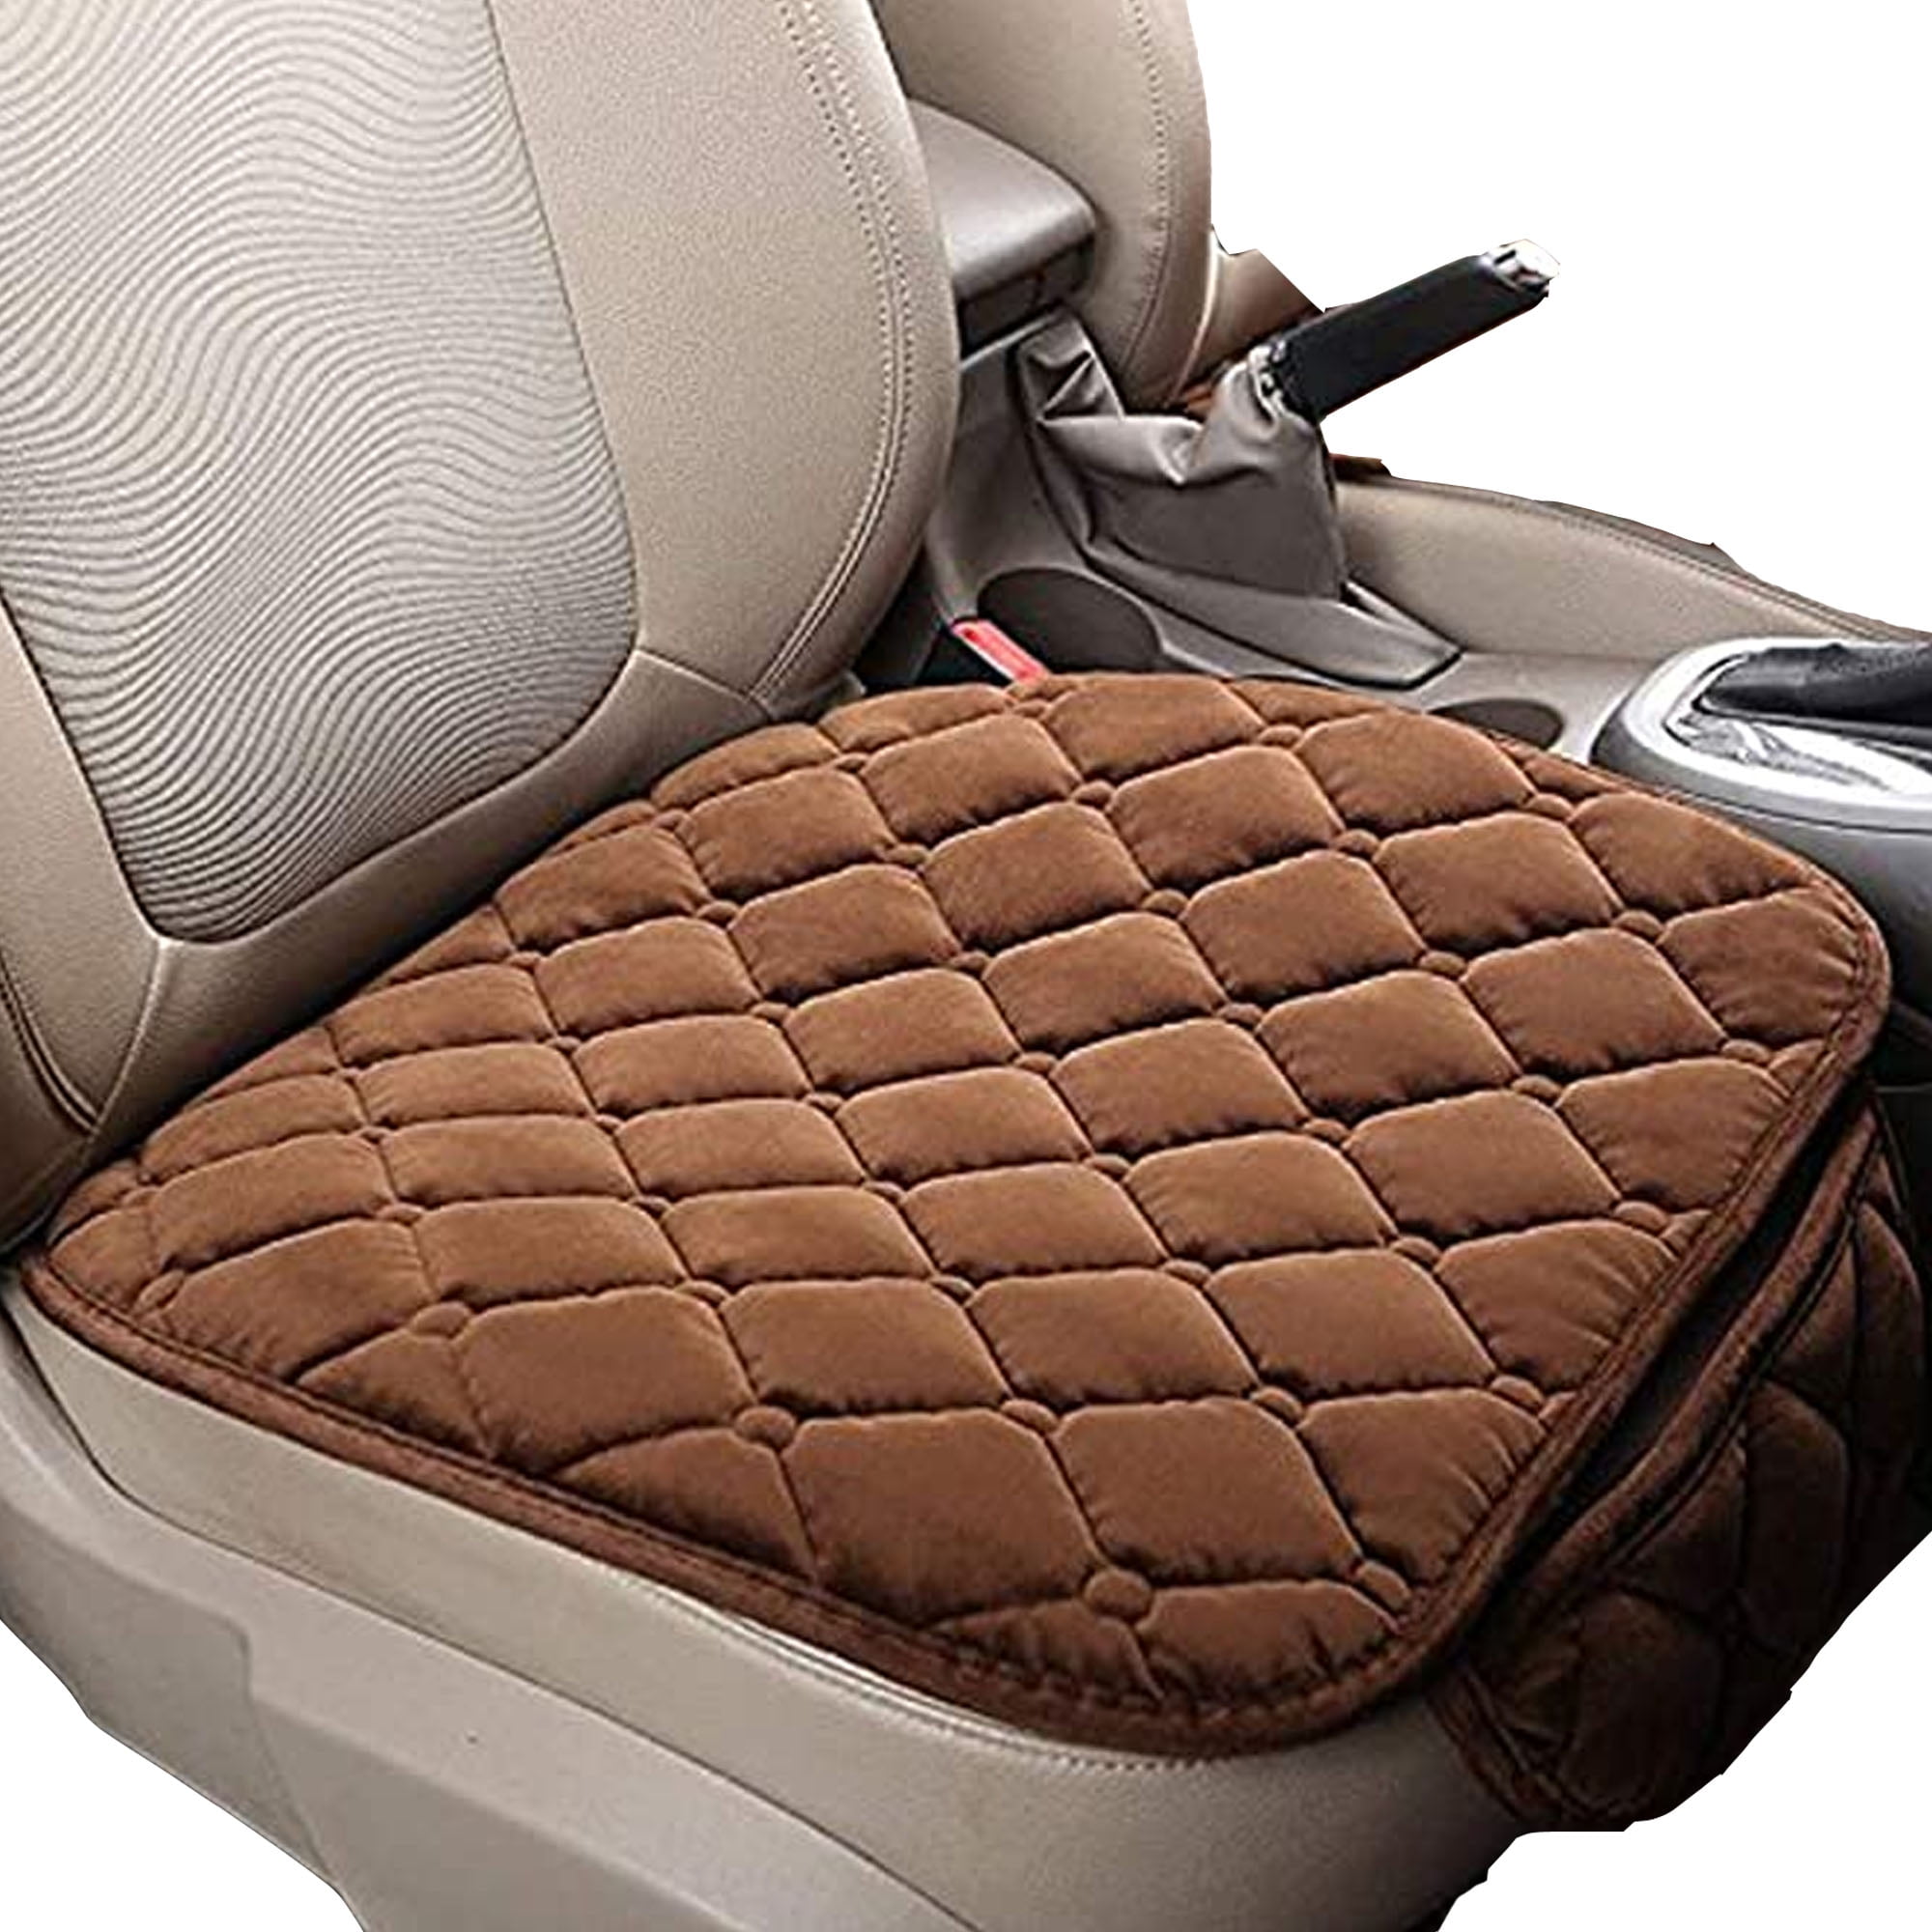 SUV Waterproof Neoprene Auto Armrest Seat Box Cover Protector Fit Most Vehicle Gocerktr Haunted Mansion Car Center Console Cushion Pad Universal Accessories Truck 